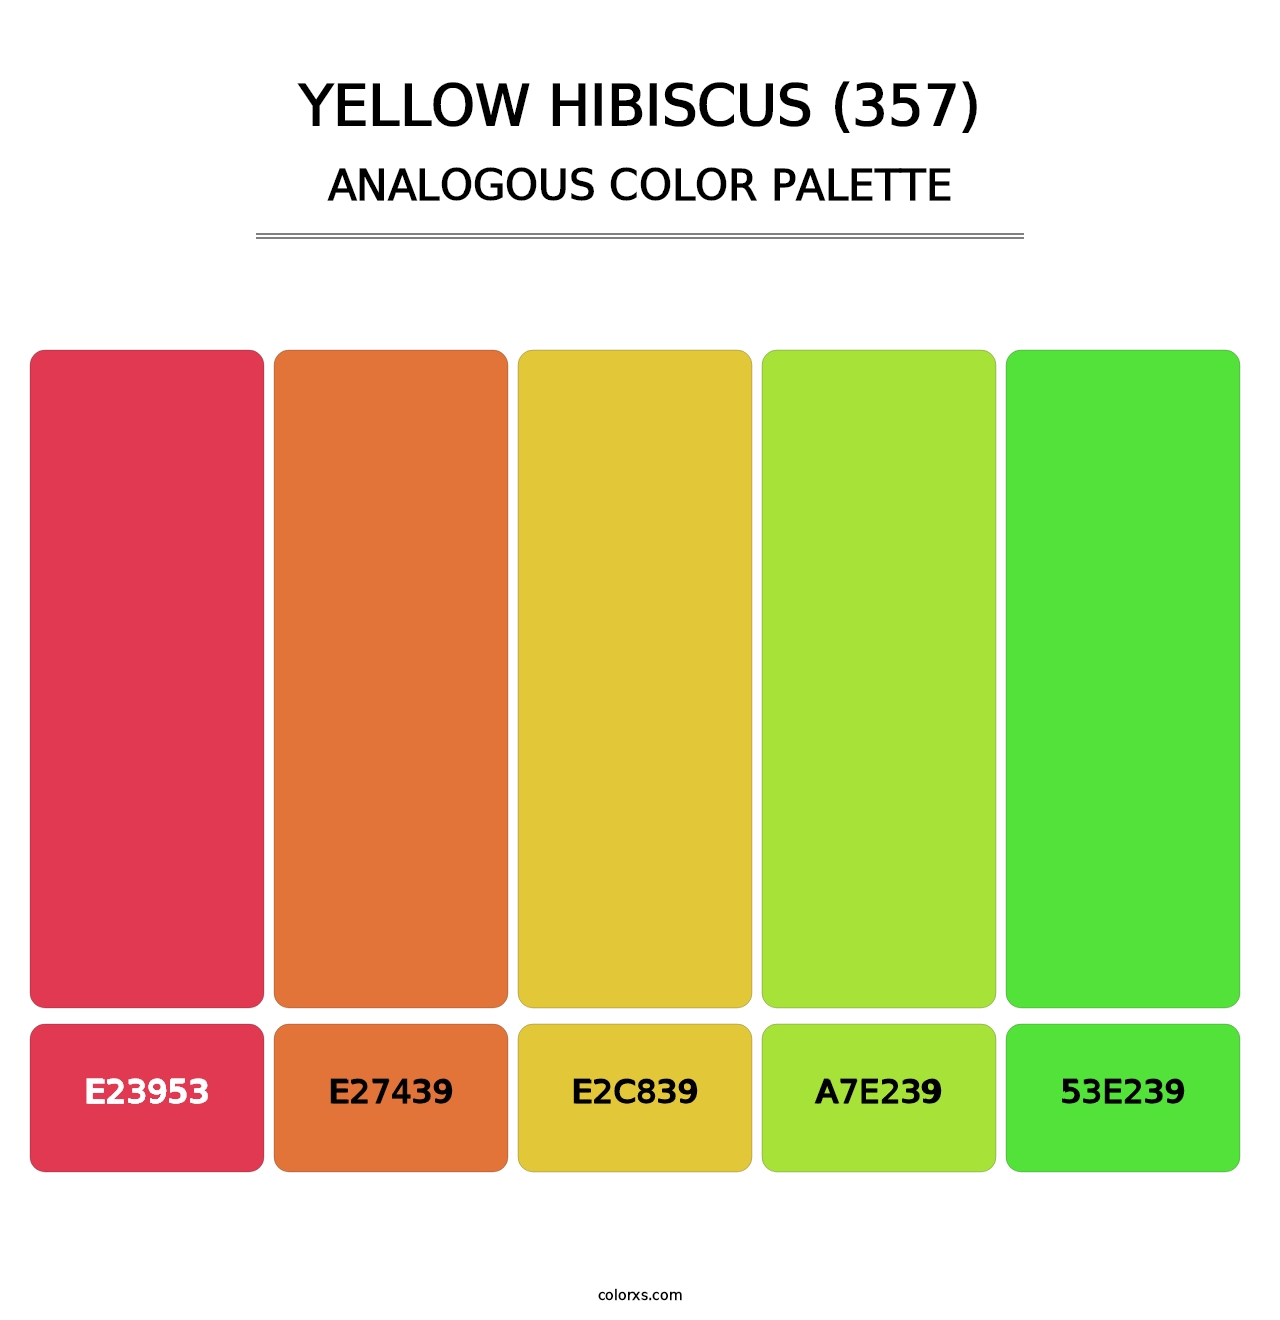 Yellow Hibiscus (357) - Analogous Color Palette